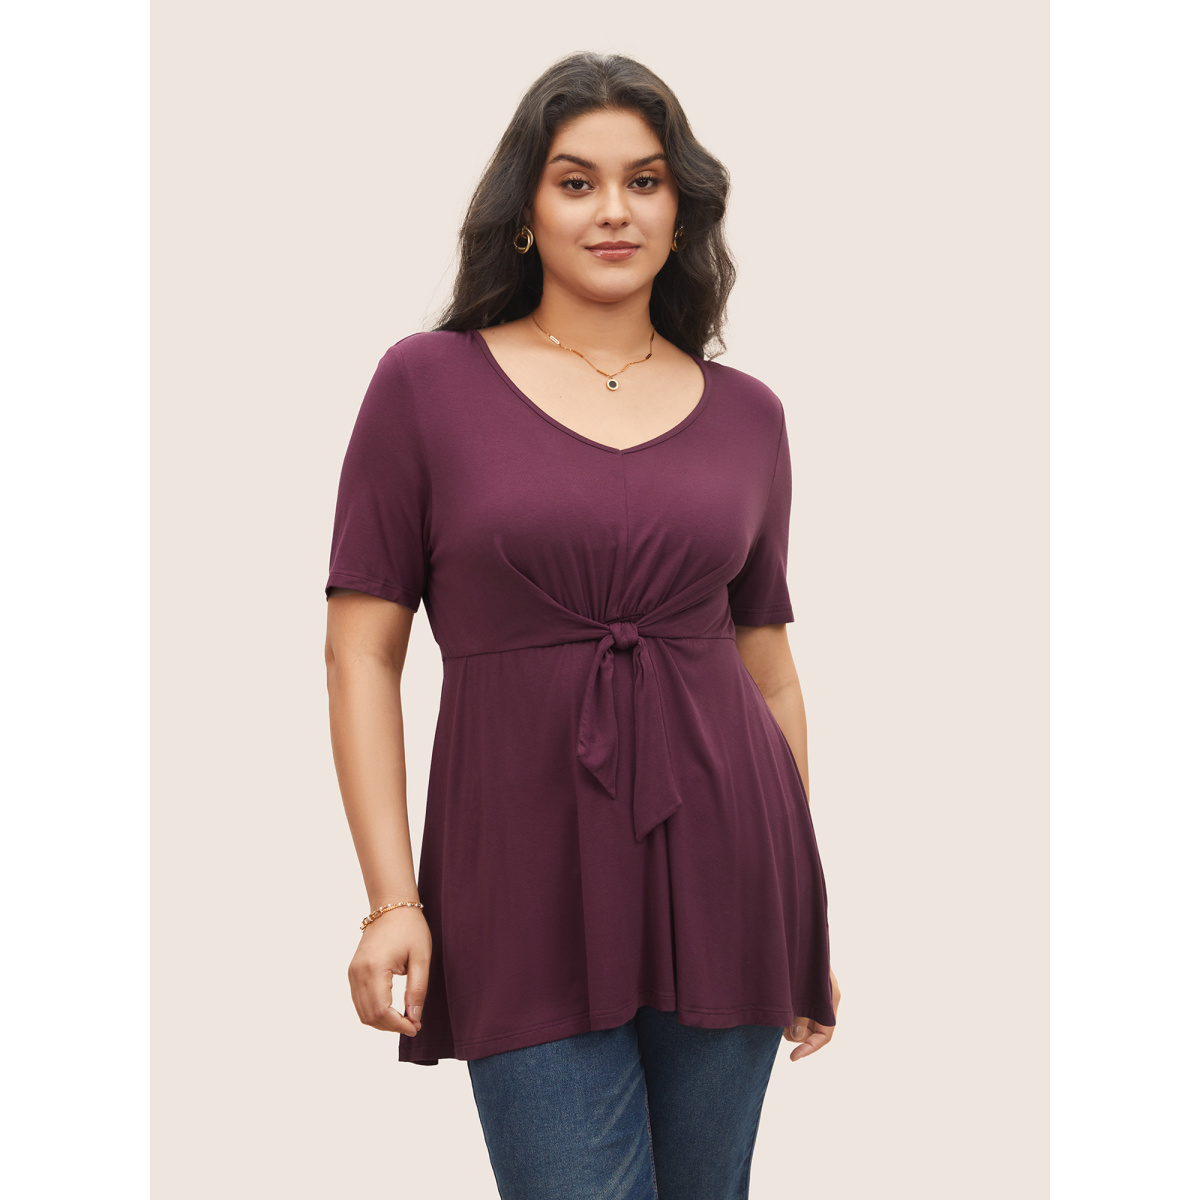 

Plus Size Supersoft Essentials Solid Ties Knot Knit Top RedViolet Women Elegant Non Plain V-neck Everyday T-shirts BloomChic